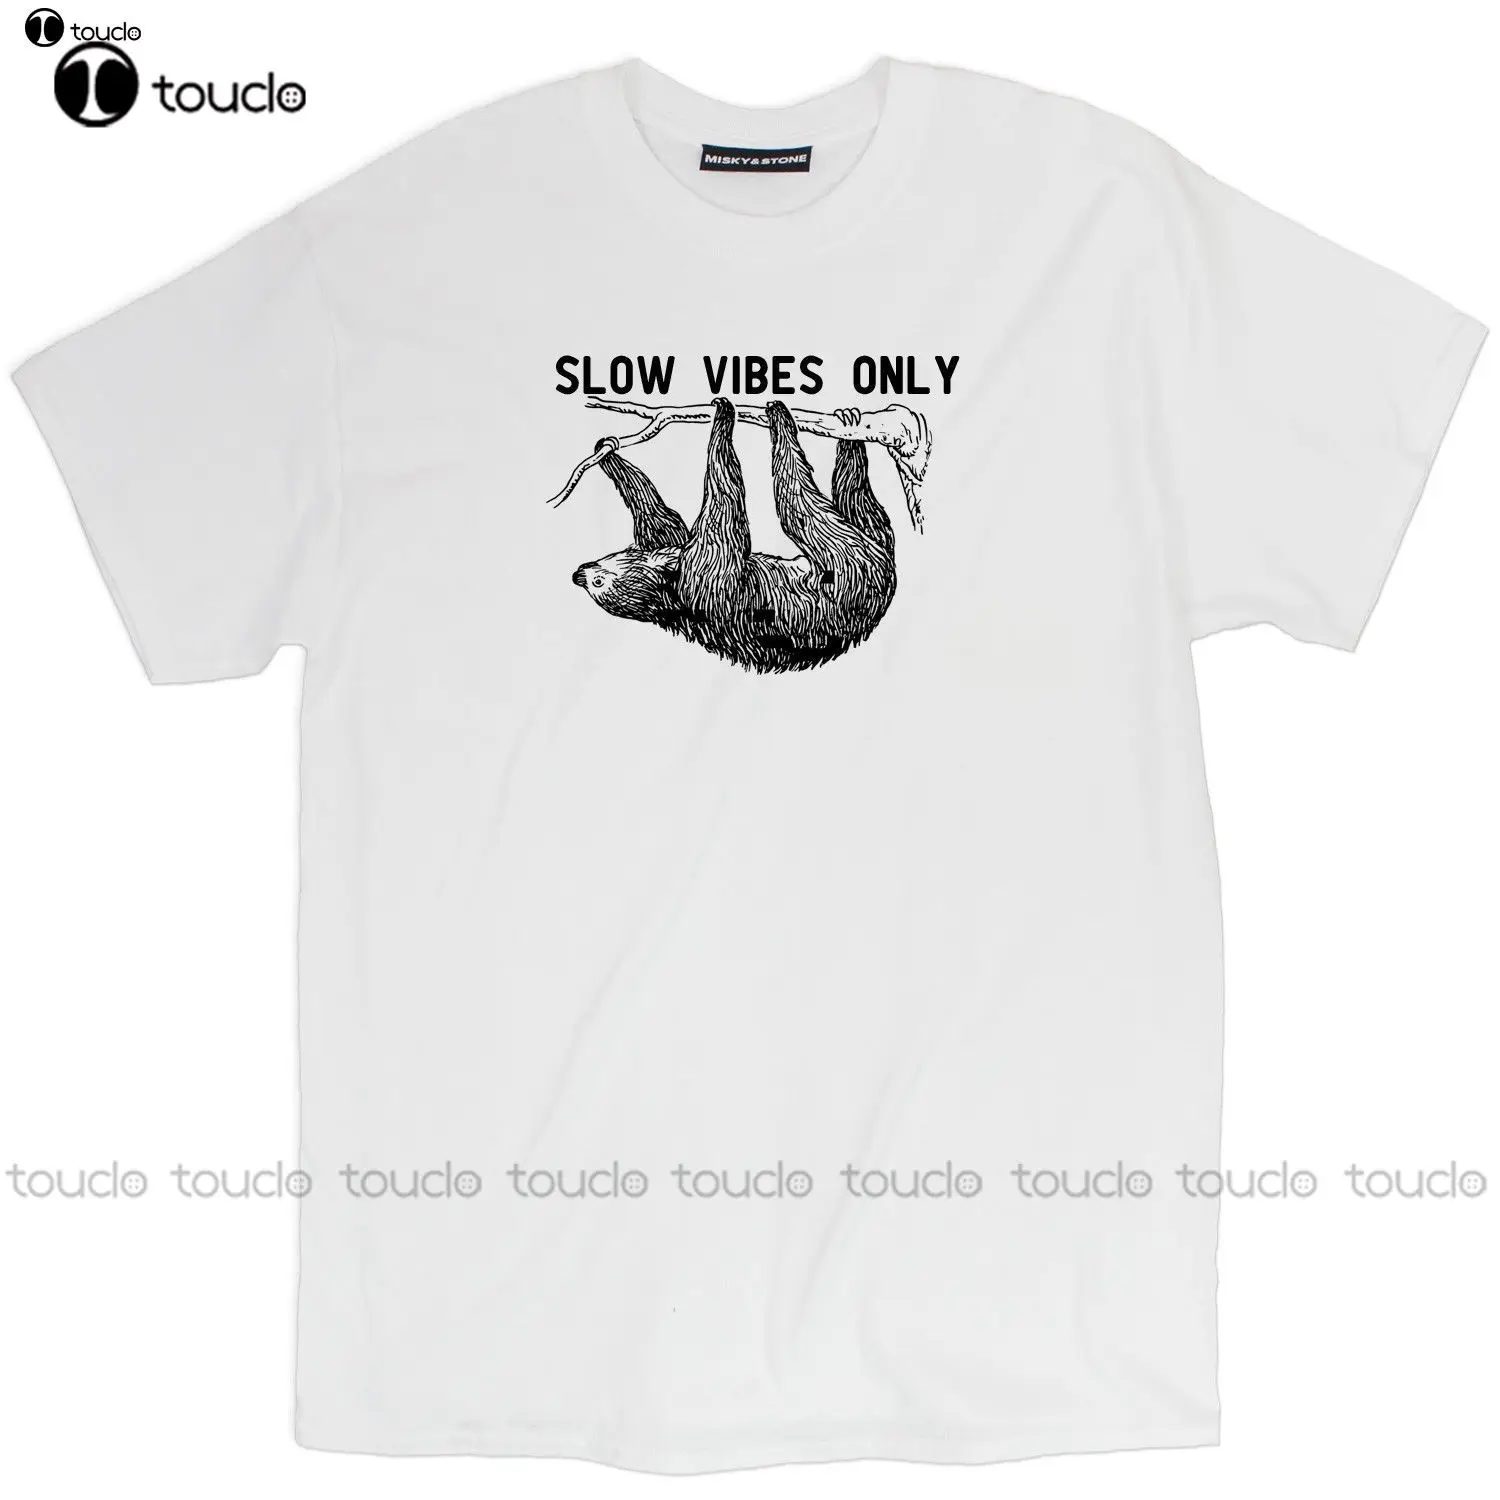 

Men'S T-Shirt Newest Slow Vibes Only Funny Sloth Unisex Loose Fit Sloth Tee Base Shirt Custom aldult Teen unisex